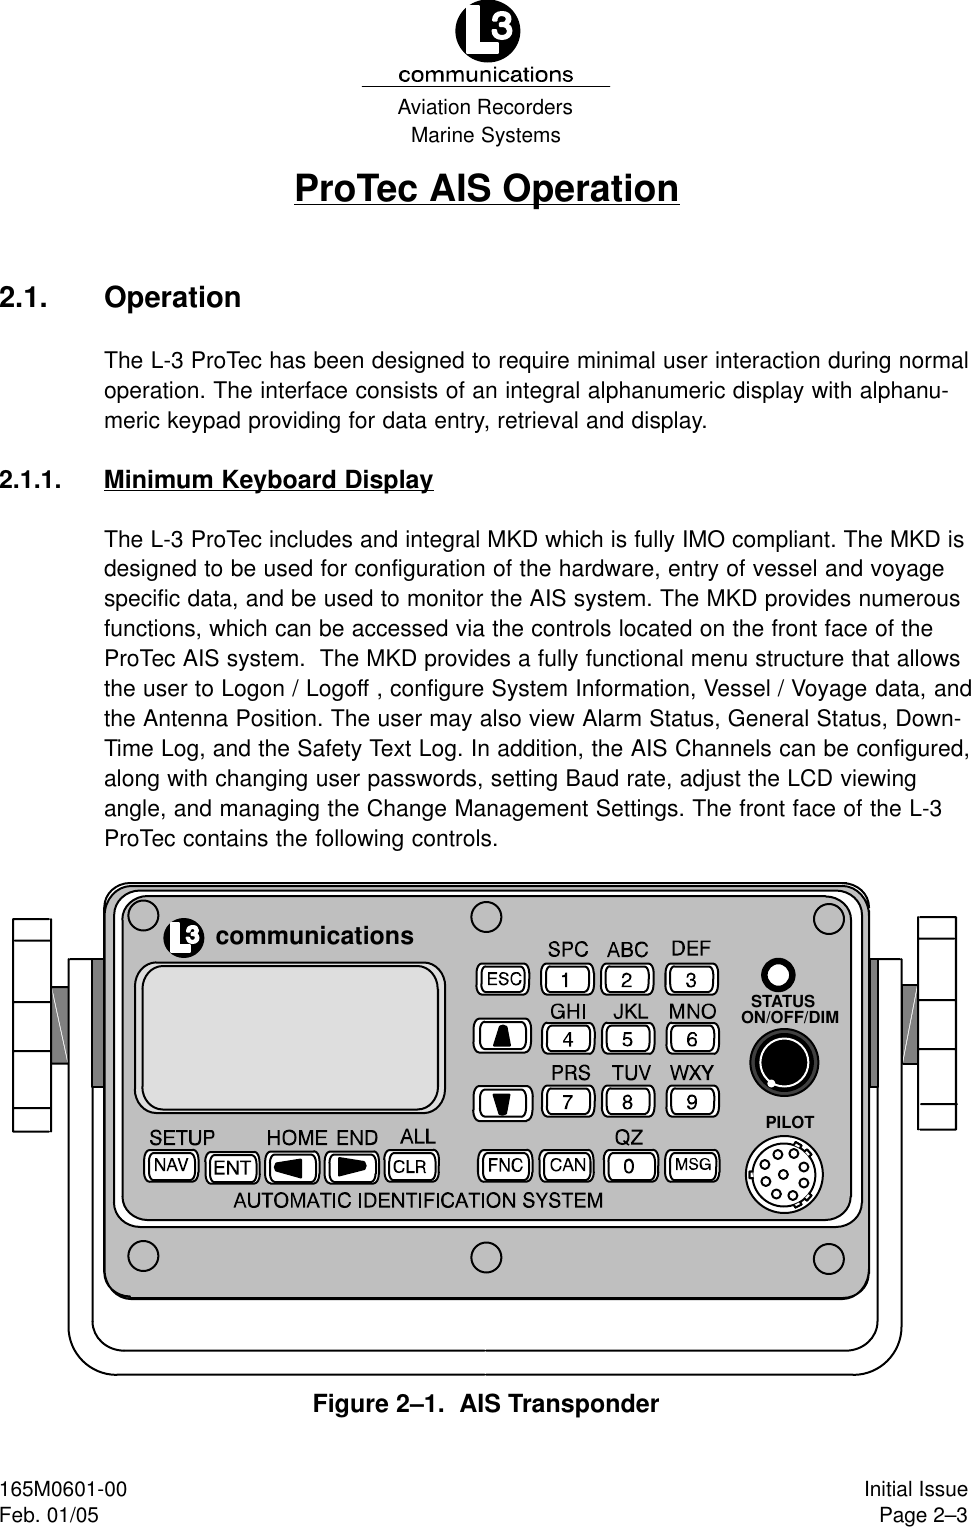 Marine SystemsAviation RecordersPage 2–3Initial Issue165M0601-00Feb. 01/05ProTec AIS Operation2.1. OperationThe L-3 ProTec has been designed to require minimal user interaction during normaloperation. The interface consists of an integral alphanumeric display with alphanu-meric keypad providing for data entry, retrieval and display.2.1.1. Minimum Keyboard DisplayThe L-3 ProTec includes and integral MKD which is fully IMO compliant. The MKD isdesigned to be used for configuration of the hardware, entry of vessel and voyagespecific data, and be used to monitor the AIS system. The MKD provides numerousfunctions, which can be accessed via the controls located on the front face of the ProTec AIS system.  The MKD provides a fully functional menu structure that allowsthe user to Logon / Logoff , configure System Information, Vessel / Voyage data, andthe Antenna Position. The user may also view Alarm Status, General Status, Down-Time Log, and the Safety Text Log. In addition, the AIS Channels can be configured,along with changing user passwords, setting Baud rate, adjust the LCD viewingangle, and managing the Change Management Settings. The front face of the L-3ProTec contains the following controls.communicationsSTATUSON/OFF/DIMPILOTFigure 2–1.  AIS Transponder